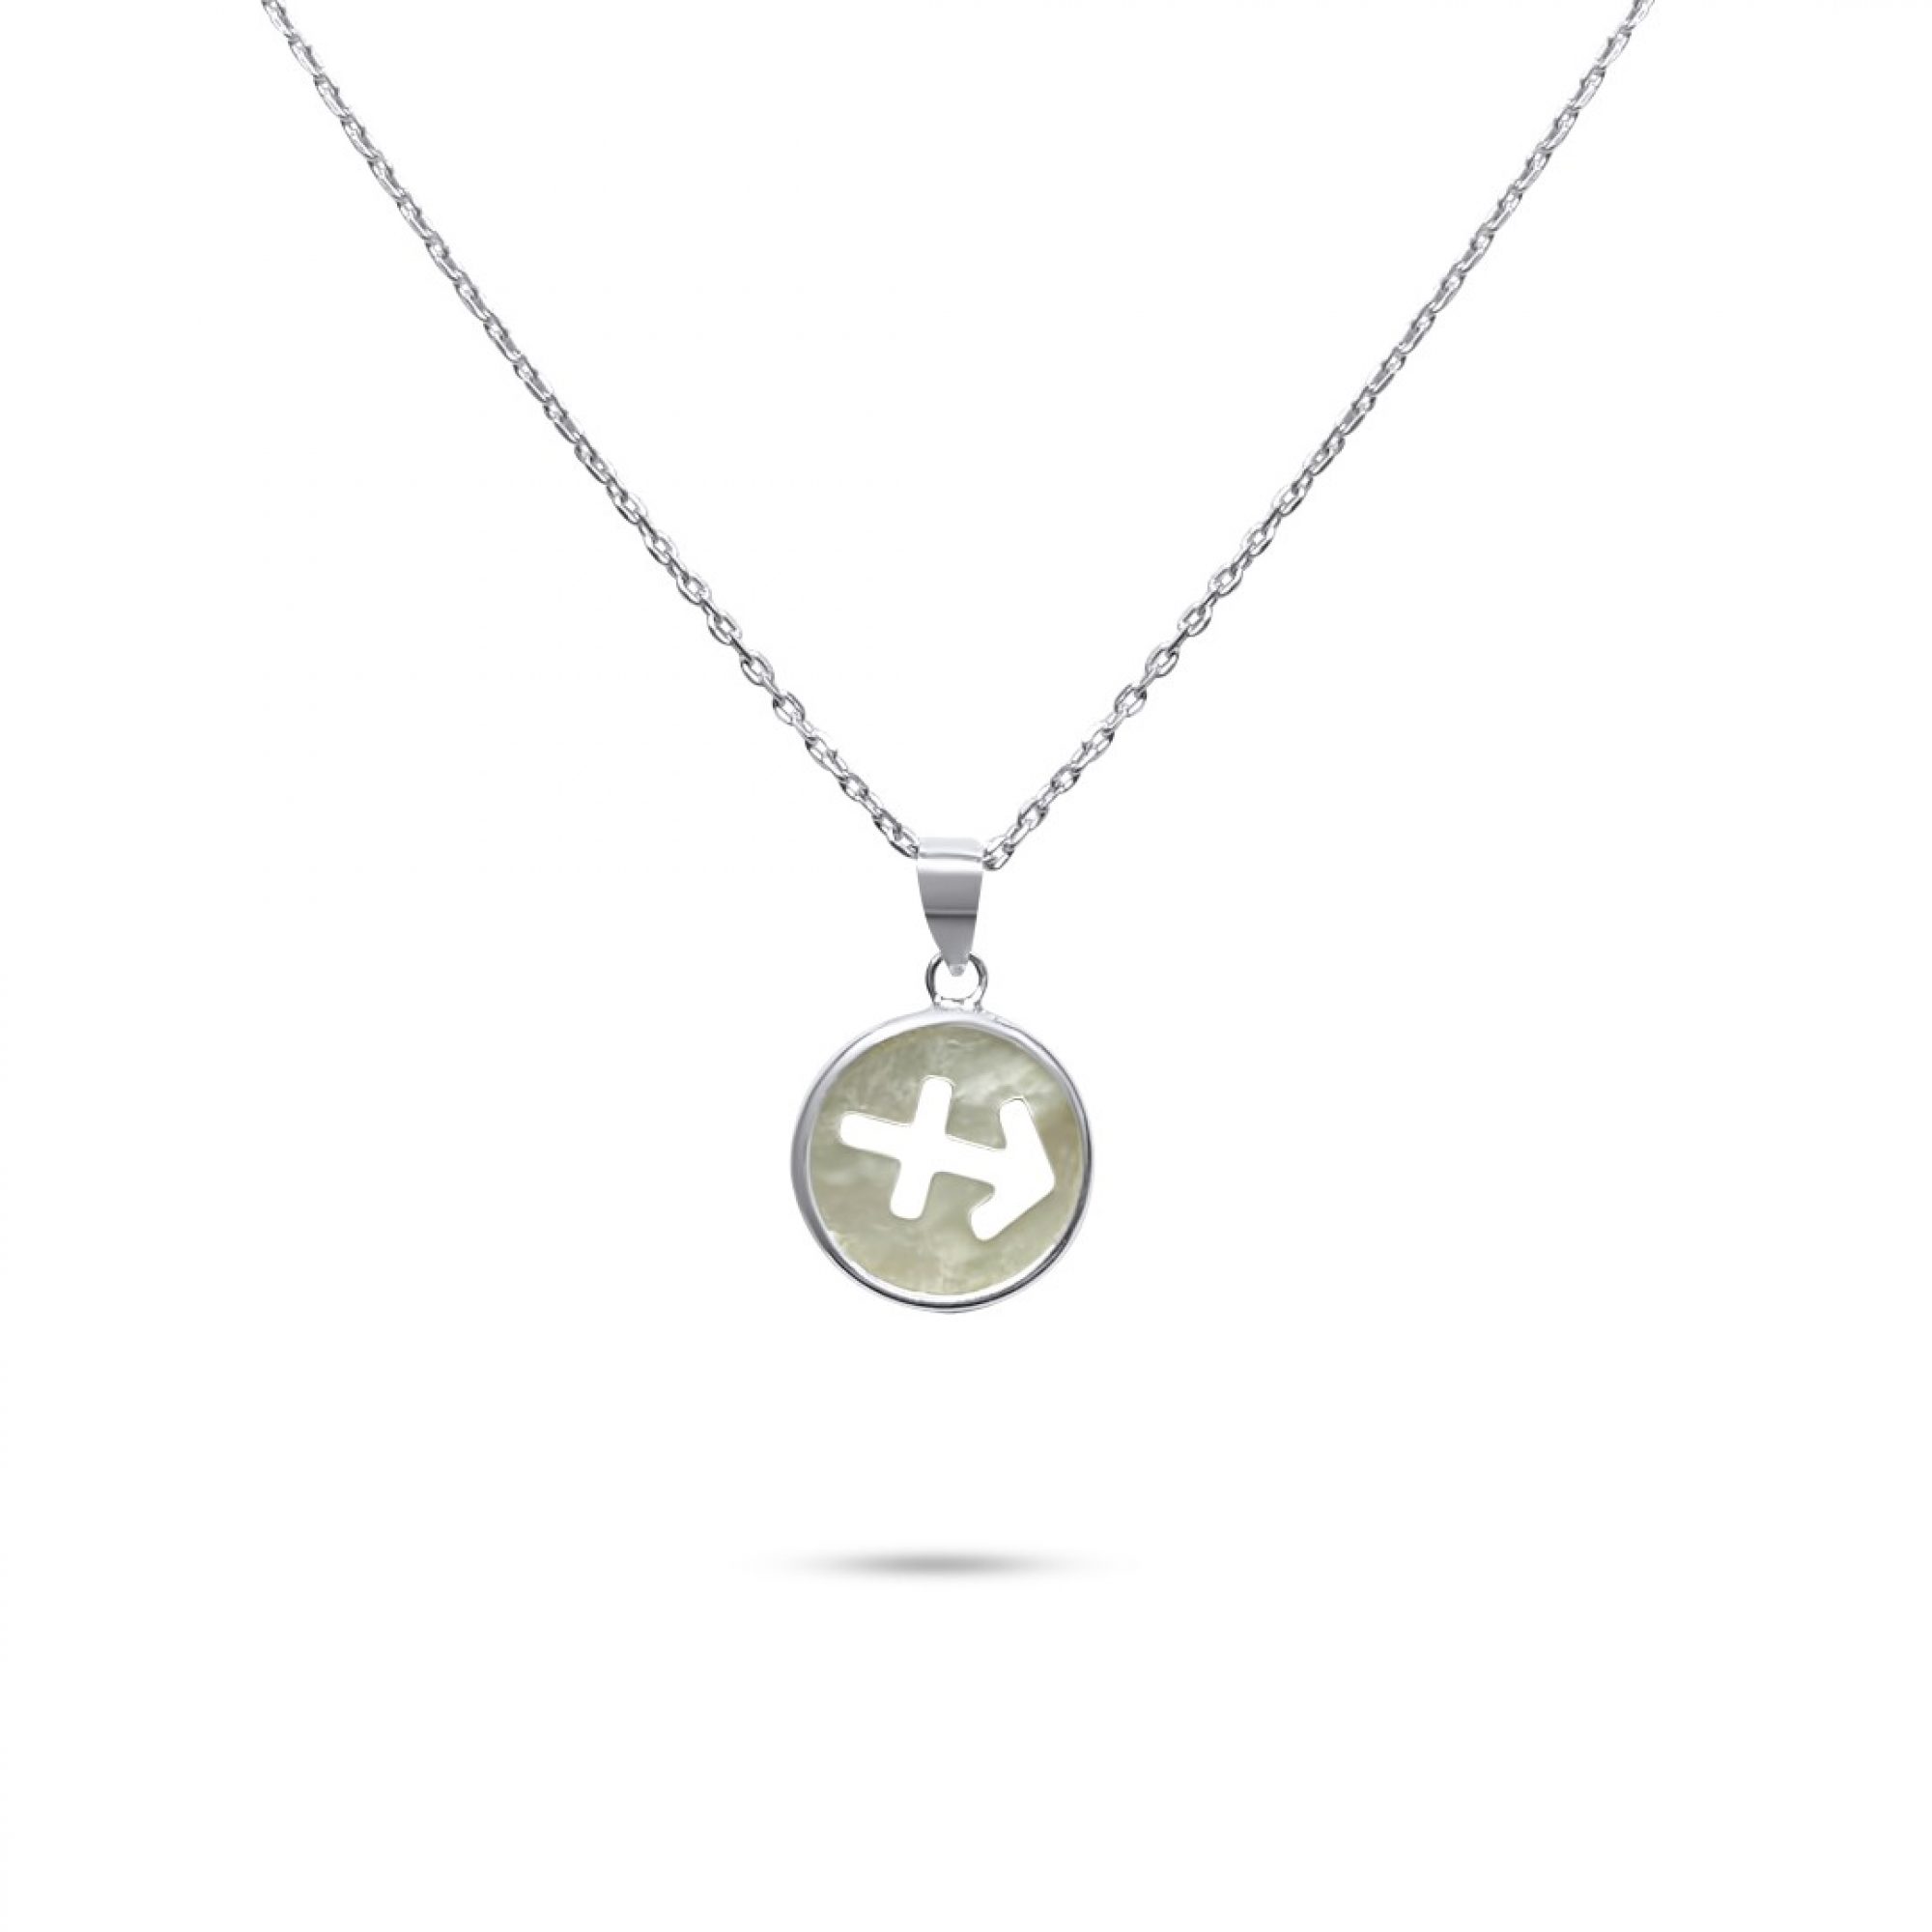 Sagittarius sign necklace with mother of pearl